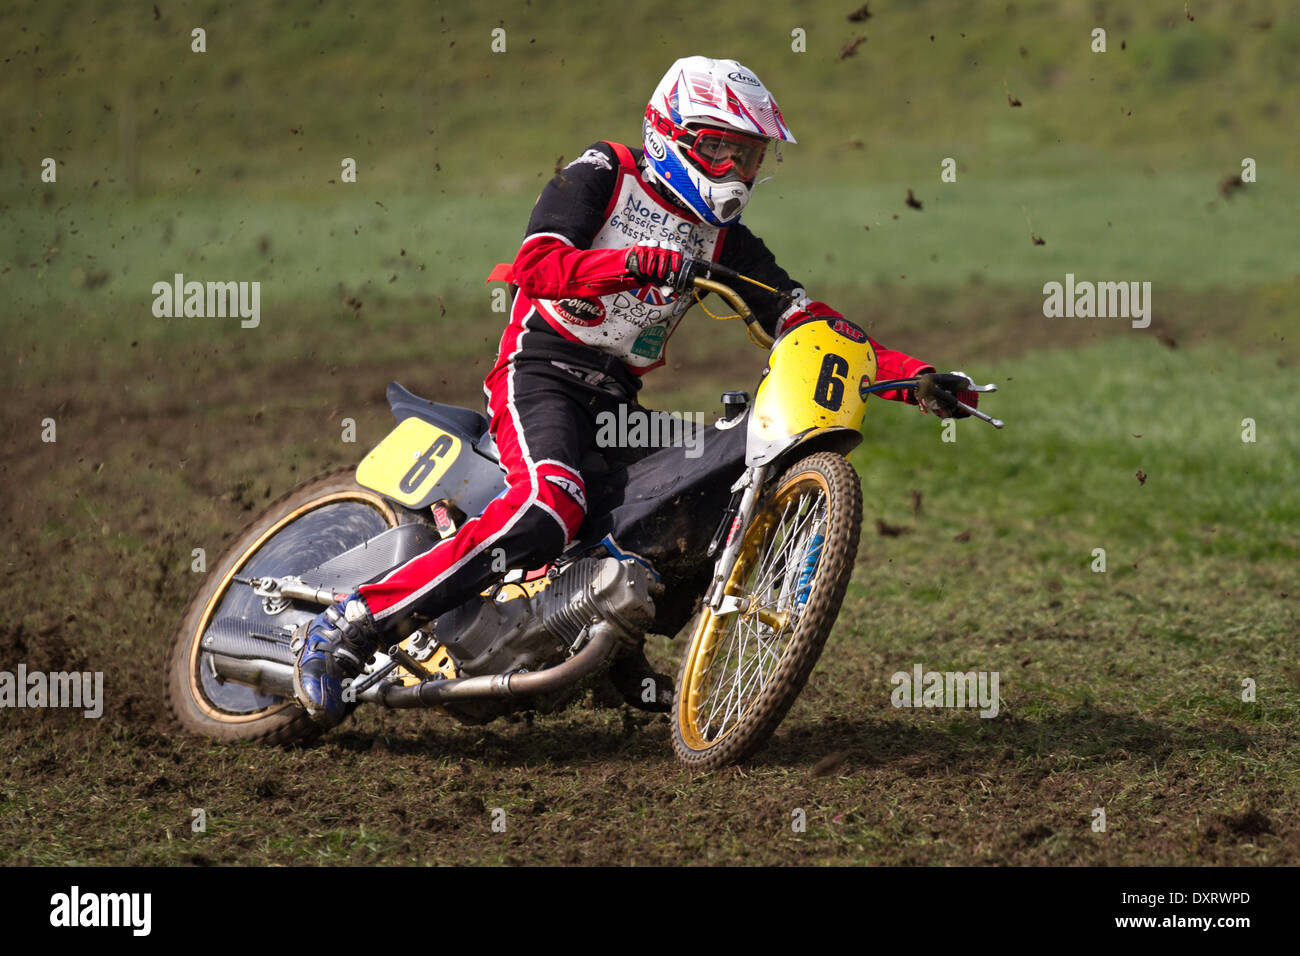 Youngsters grass track motorcycle riding in Much Hoole, Lancashire, UK March, 2014. Rob Finlow No.6  MX65 racer at the first ever meeting of the Lancashire Offroad Grasstrack Association held at Lower Marsh Farm, Much Hoole, Preston. A junior motorcycle race, grass track, speed, bike, motorbike, motorsport, power, winner, racing, motocross, competition, extreme sports, helmet, wheel, moto, sport, rider, cross, fun, jump, riding, sports, trail, dirt, fast event held under the National Sporting Code rules of the ACU standing regulations for grass tracks. Stock Photo